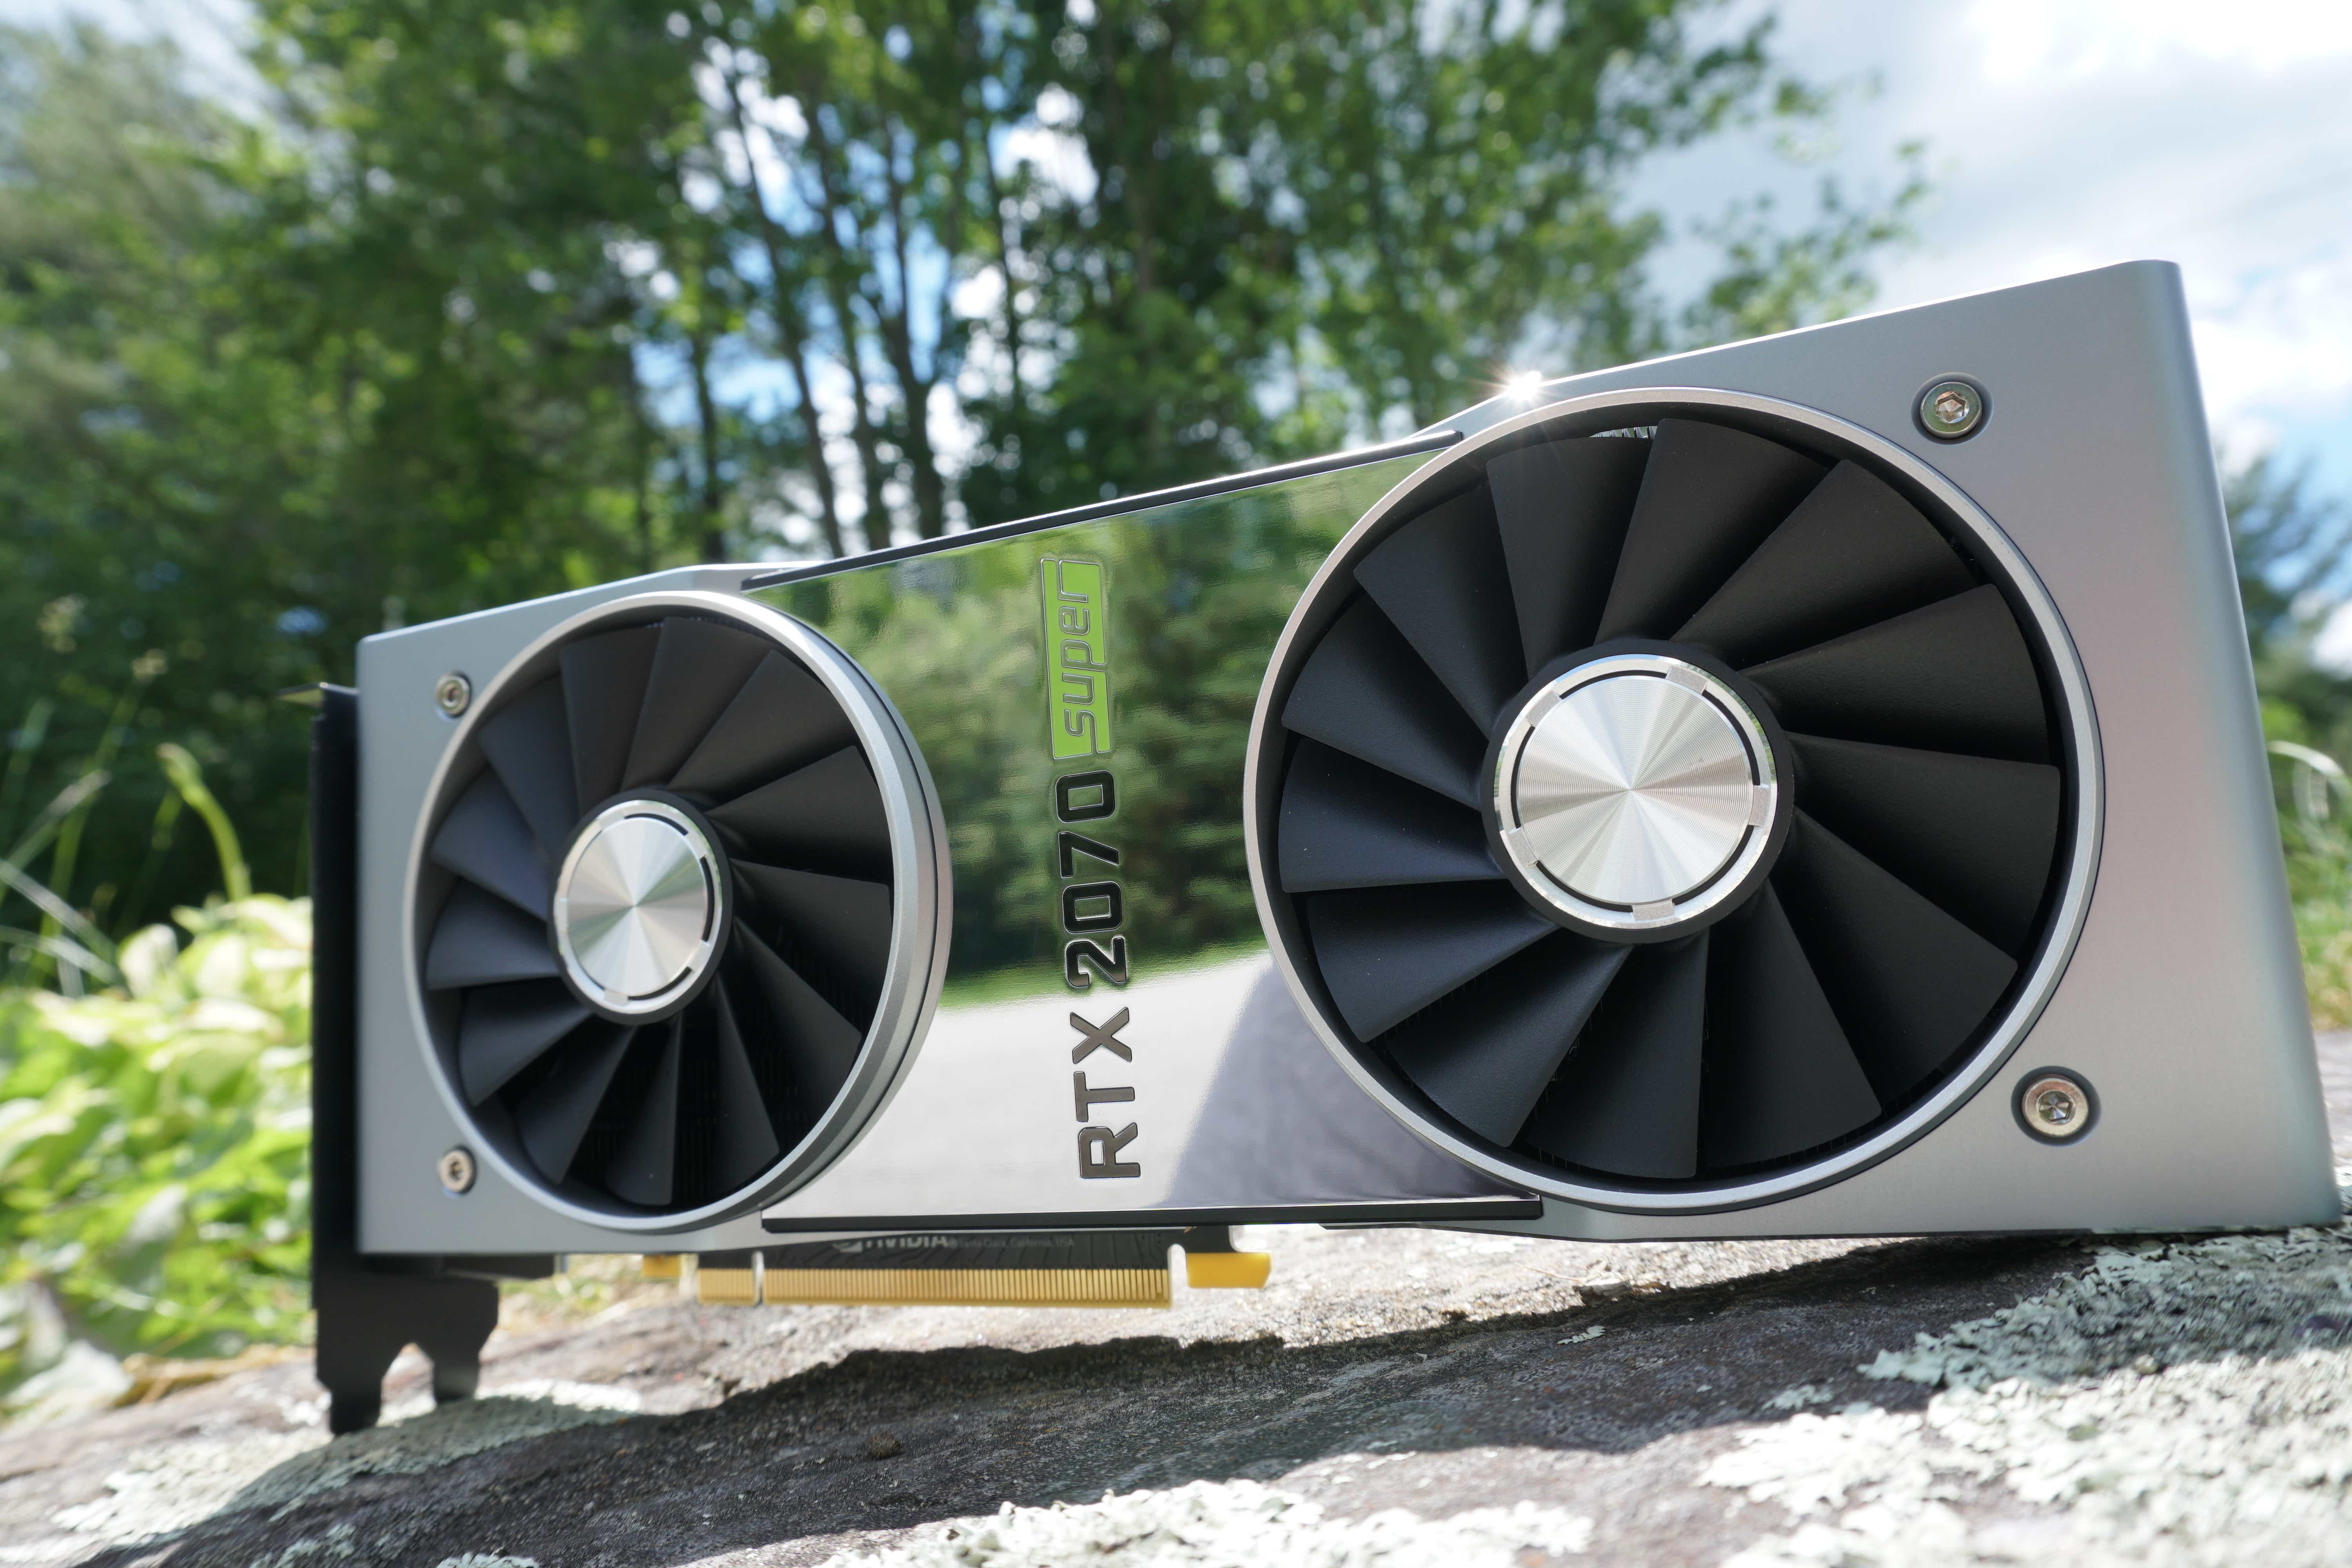 GeForce RTX 2070 Super Founders Edition